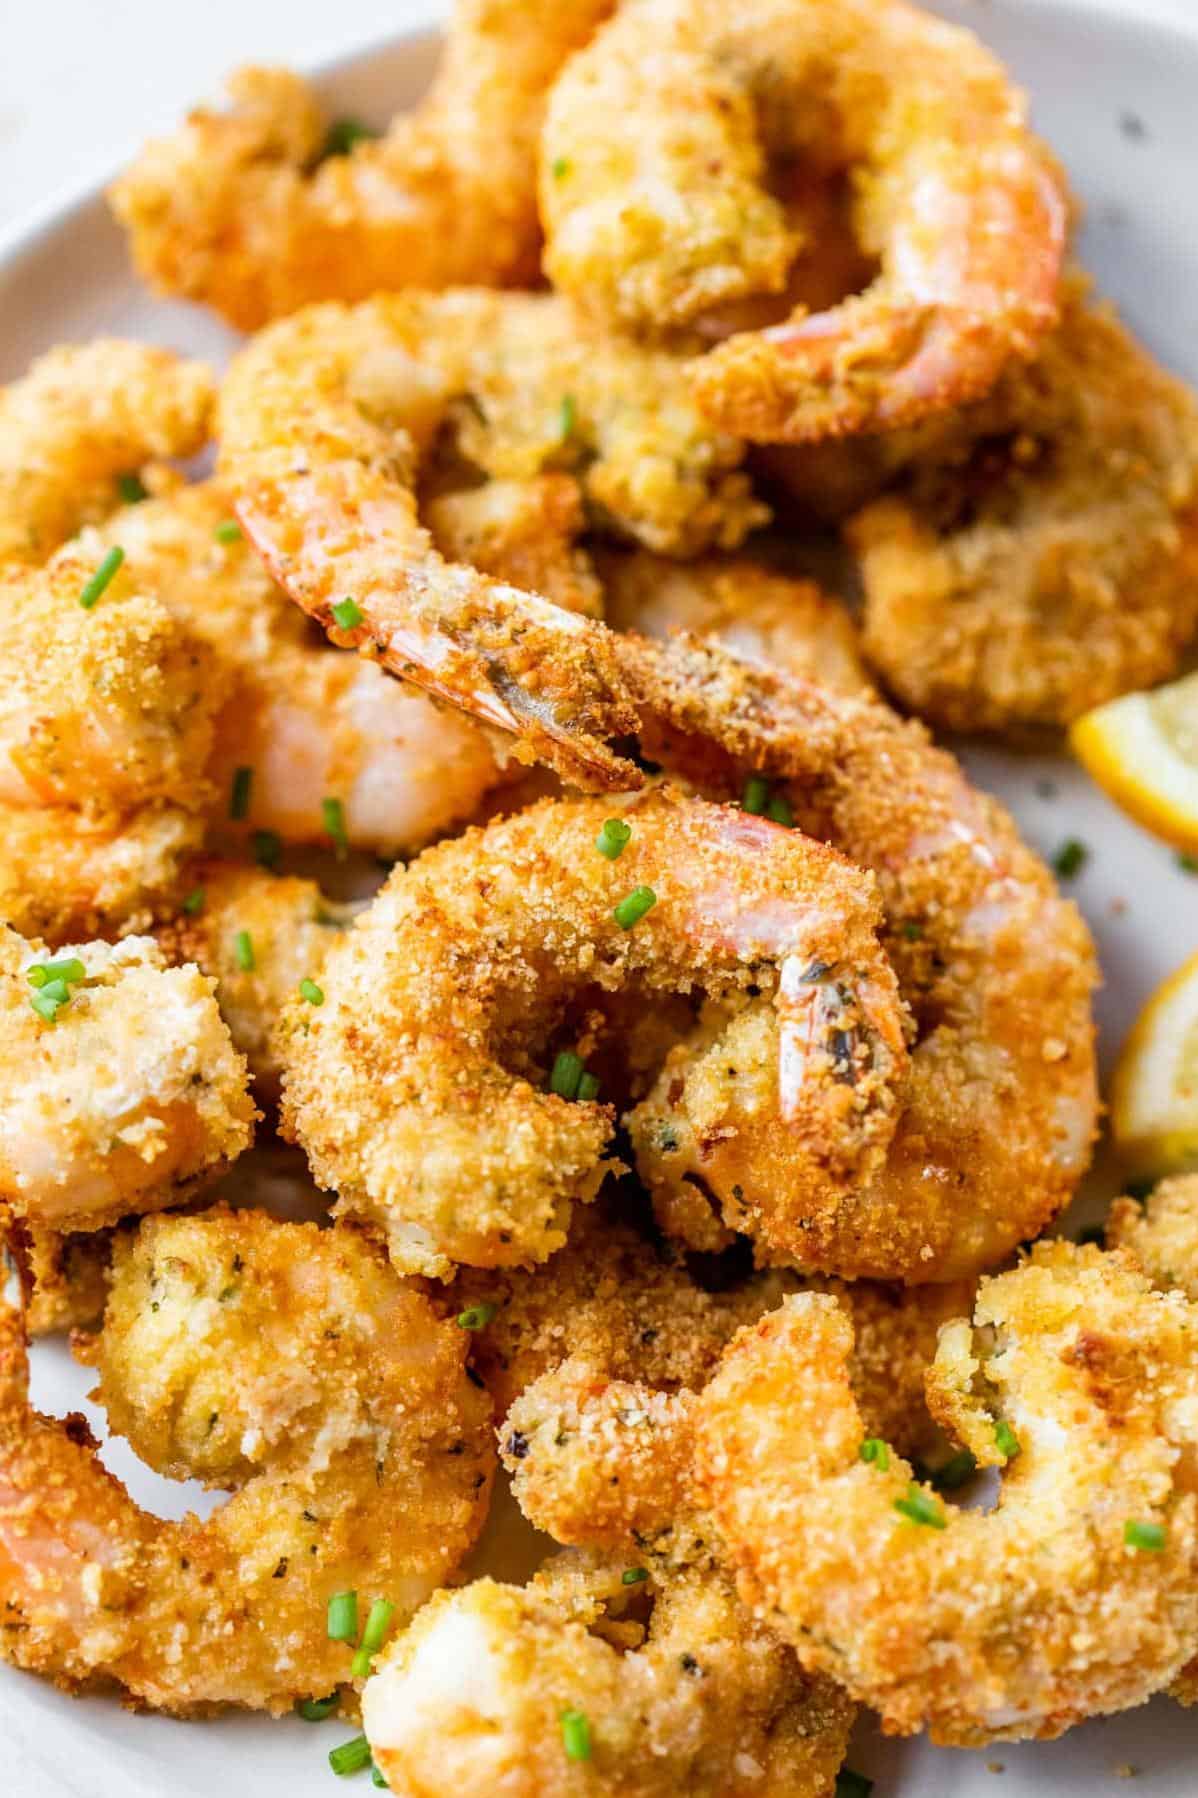  Plump and juicy shrimp coated in crispy goodness